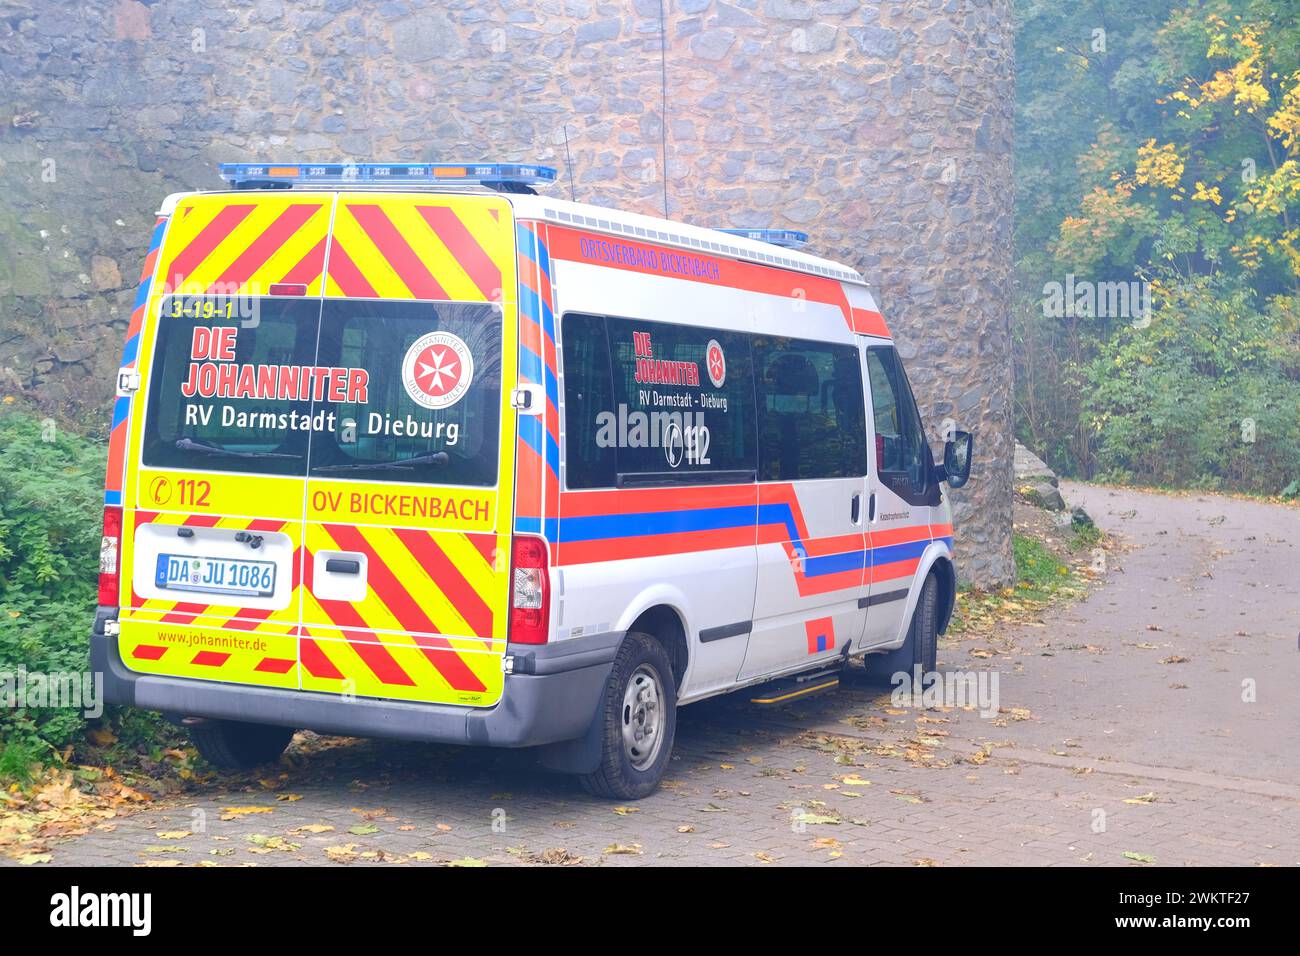 ambulance parked by ancient wall in city, concept providing urgent medical assistance, German medical services, Rapid Response Vehicles, intensive car Stock Photo